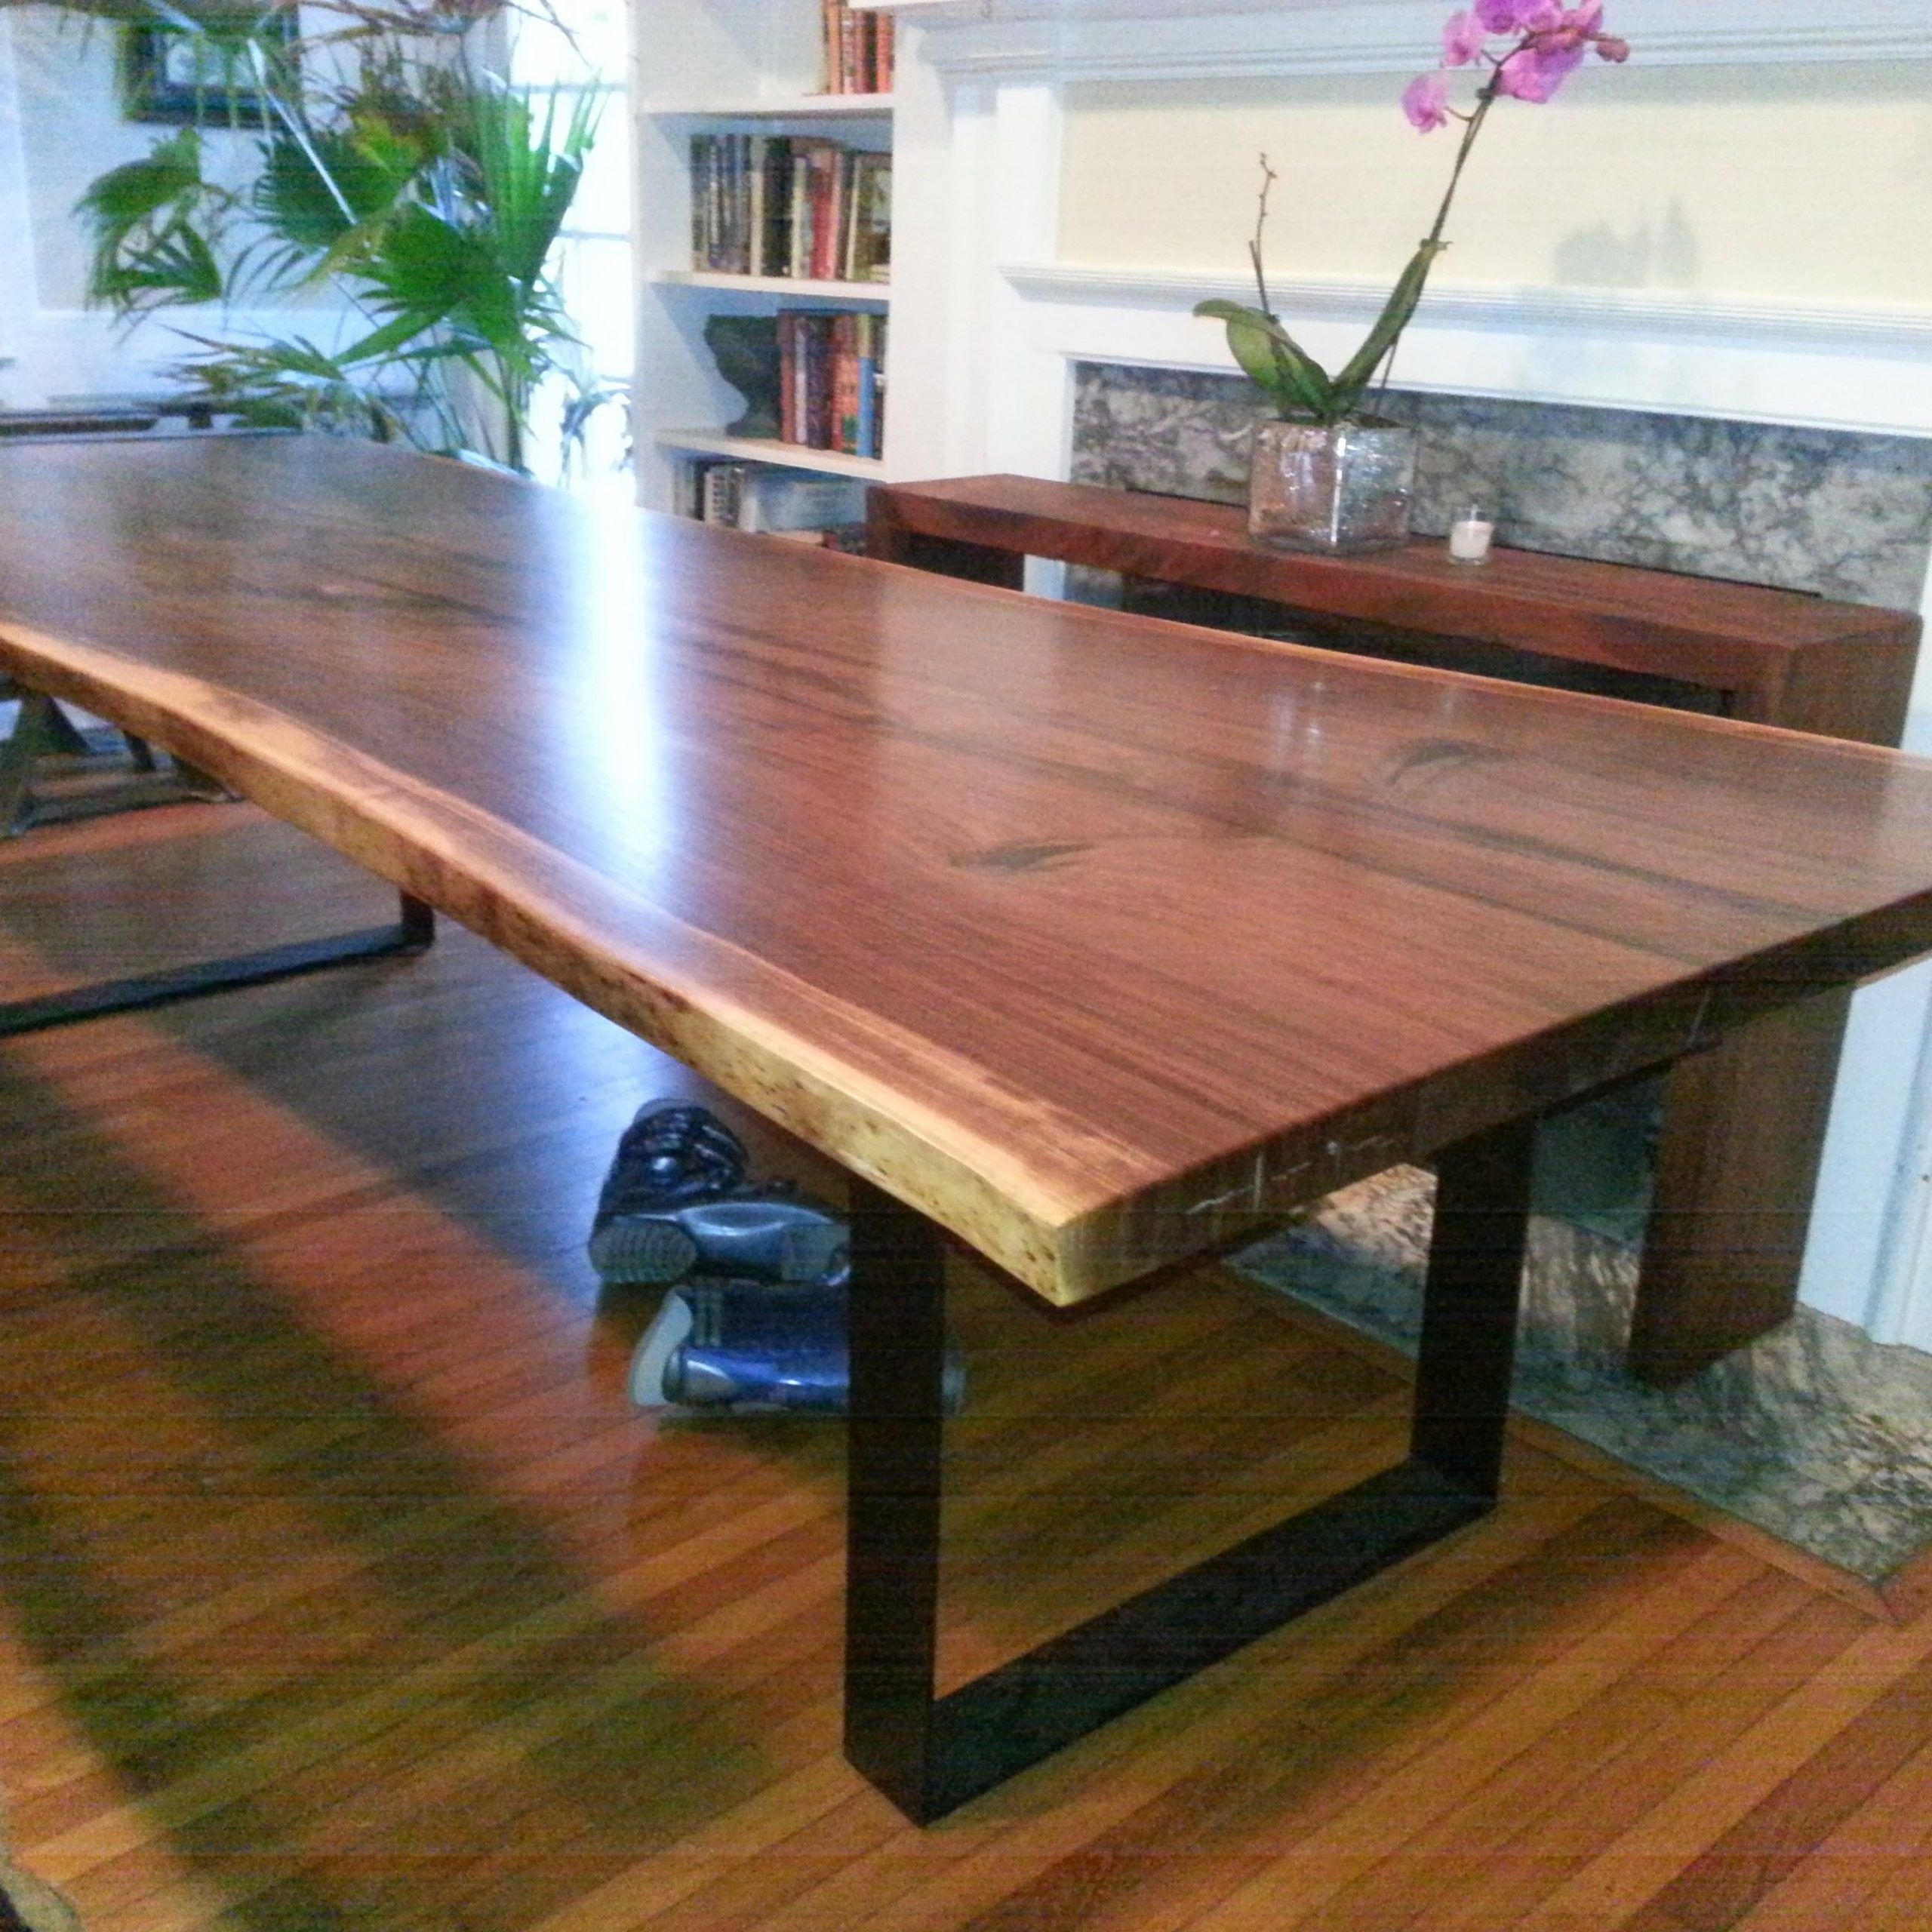 10'X4' Matchbook Black Walnut With Simple, Contemporary For 2018 Black And Walnut Dining Tables (View 1 of 15)